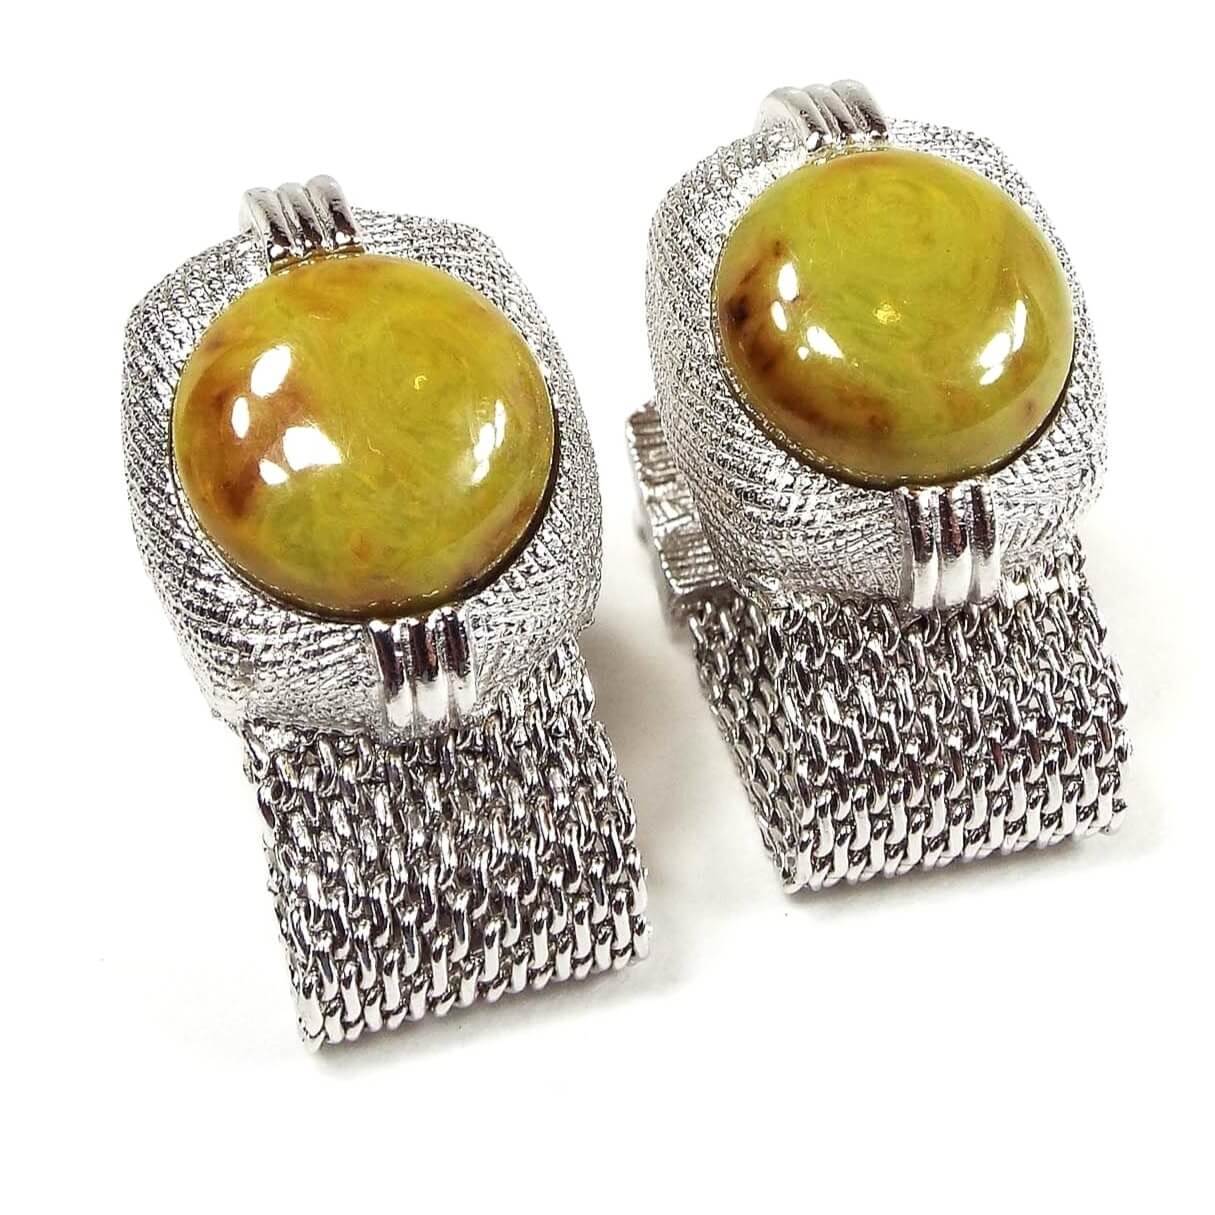 Front view of the Mid Century vintage Swank wrap around cufflinks. They are silver tone in color with mesh from the bottom that goes around to the back. The top part is textured and has domed oval lucite cabs with marbled shades of yellow, green, and orange. They have a mostly yellow look to them and have an imitation stone like appearance with each one looking different than the other in pattern.